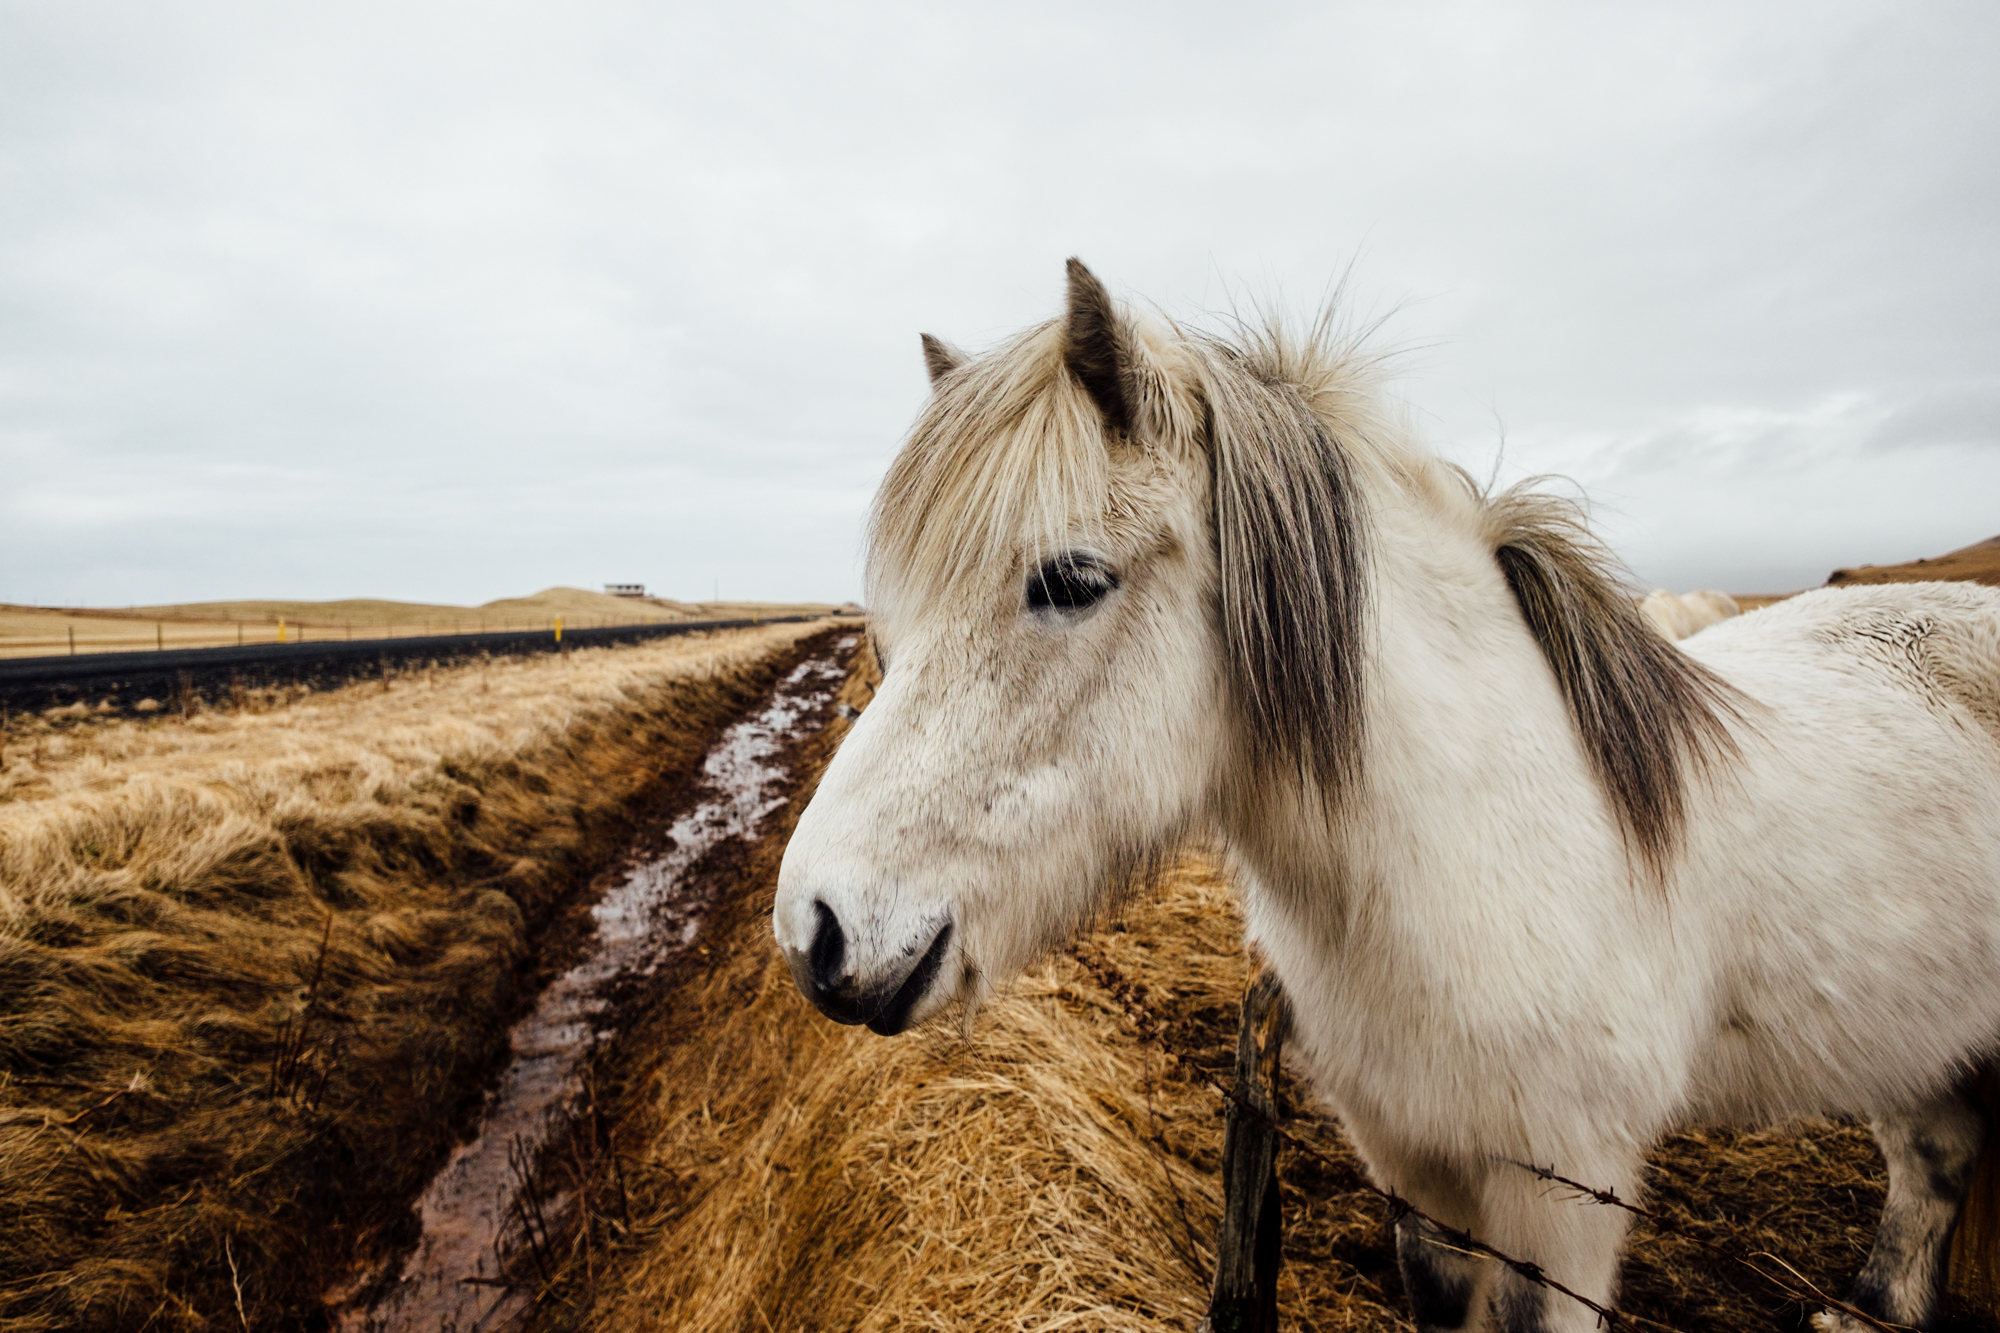  After Dyrhólaey, we headed to do a quick day trip around the Golden Circle. One our drive we were greeted by another pony looking for pets and food at the roadside. 